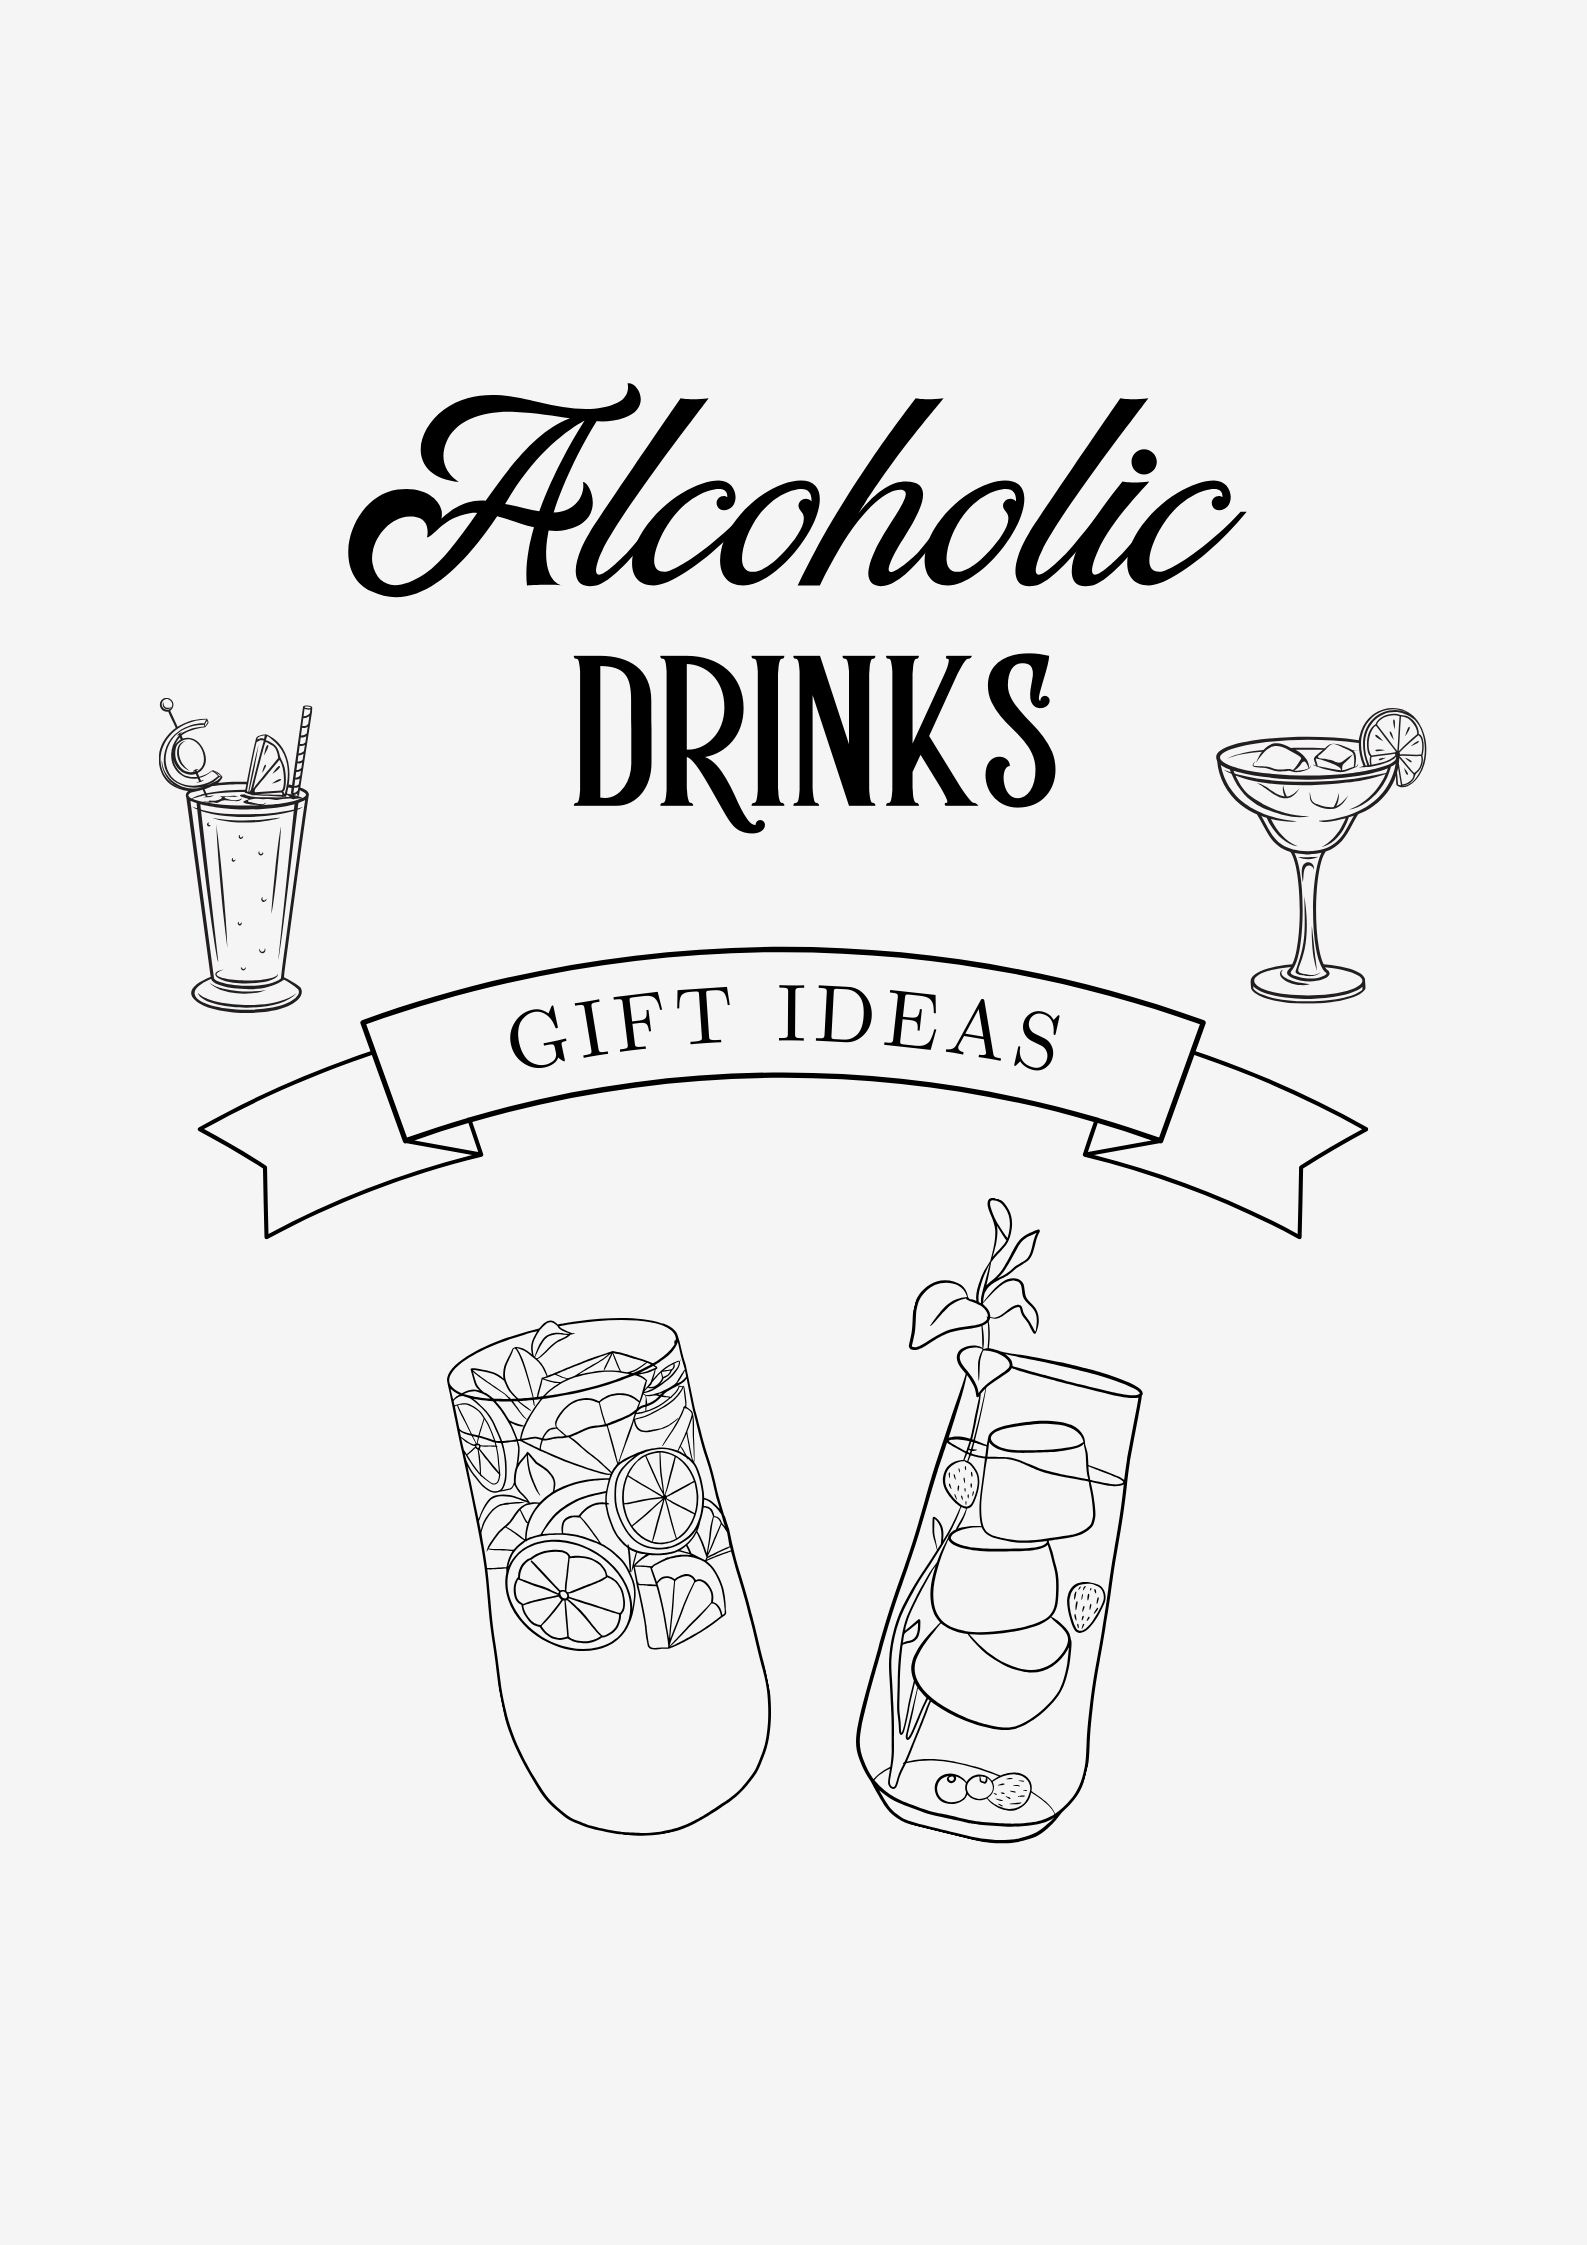 Top 5 Holiday (alcoholic) Drinks to Gift Someone Special